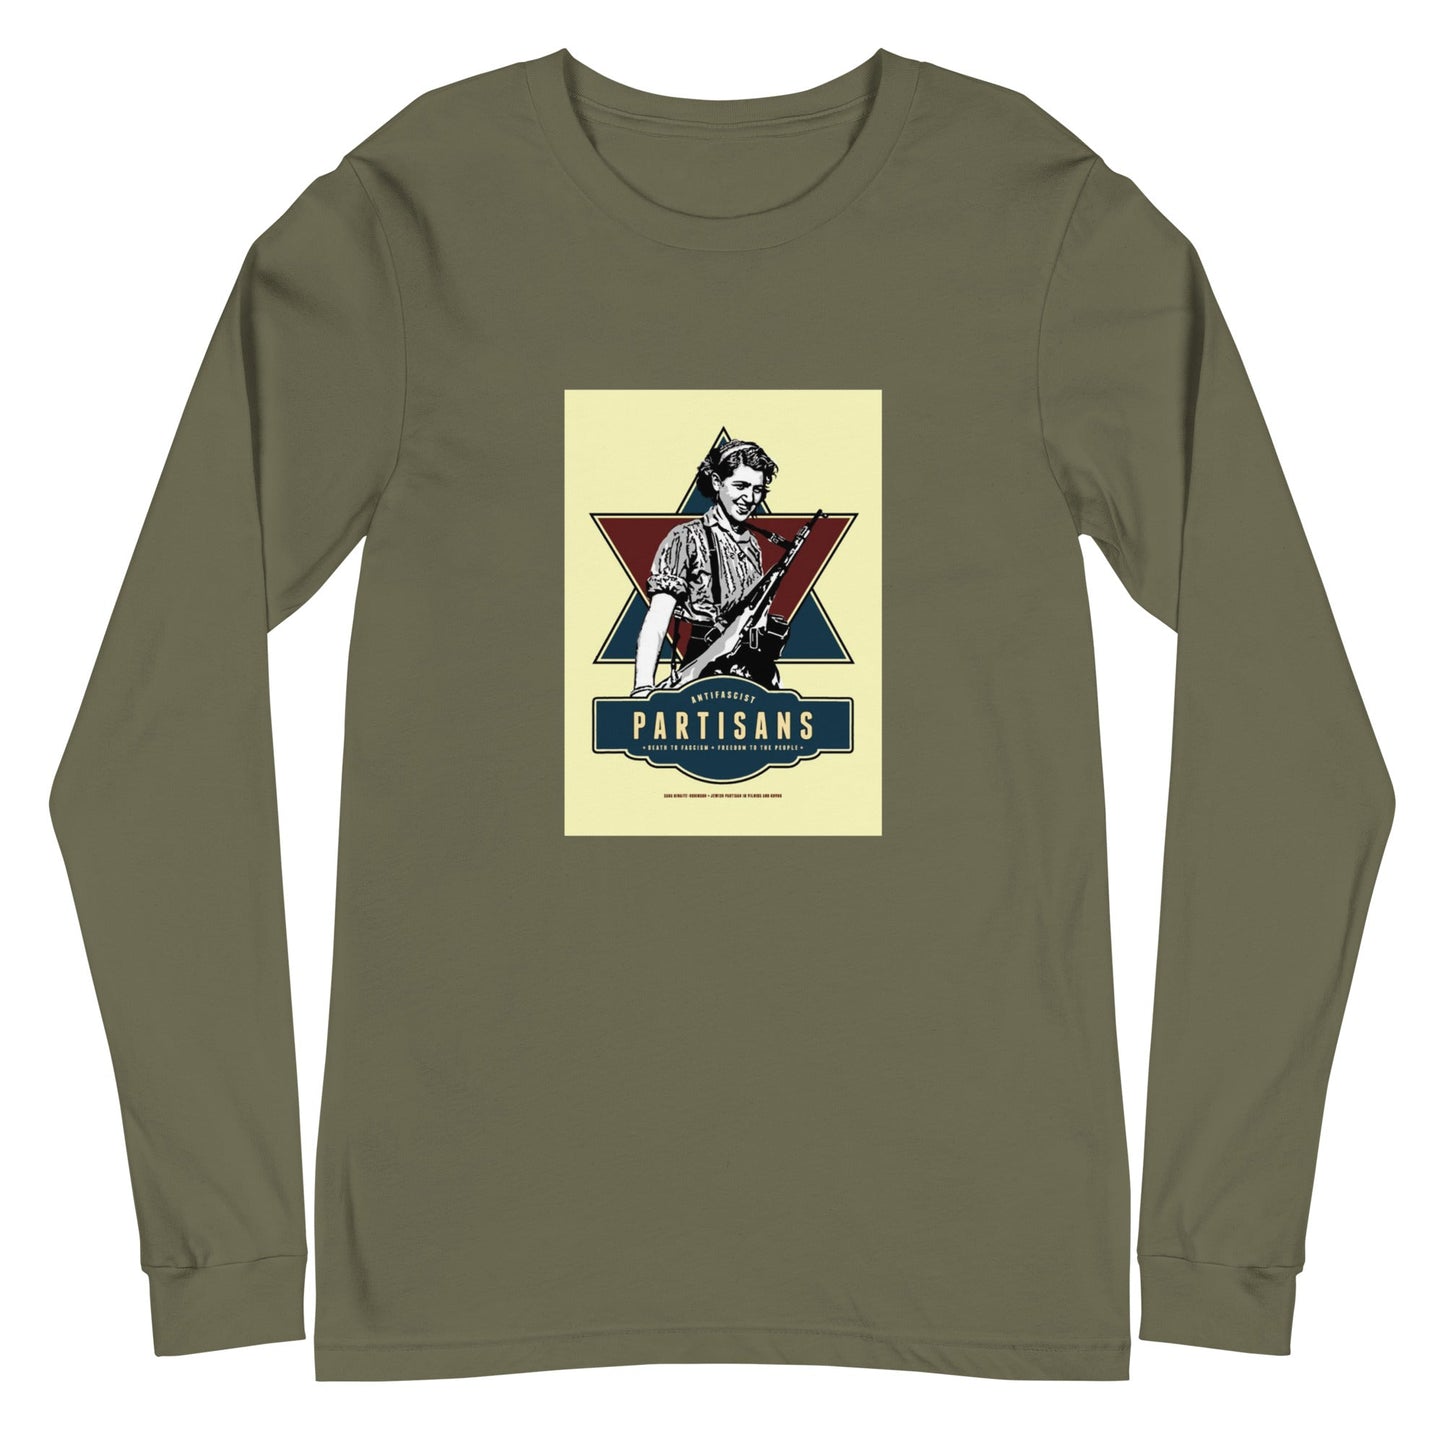 Partisans - Unisex Long Sleeve Tee - Souled Out World